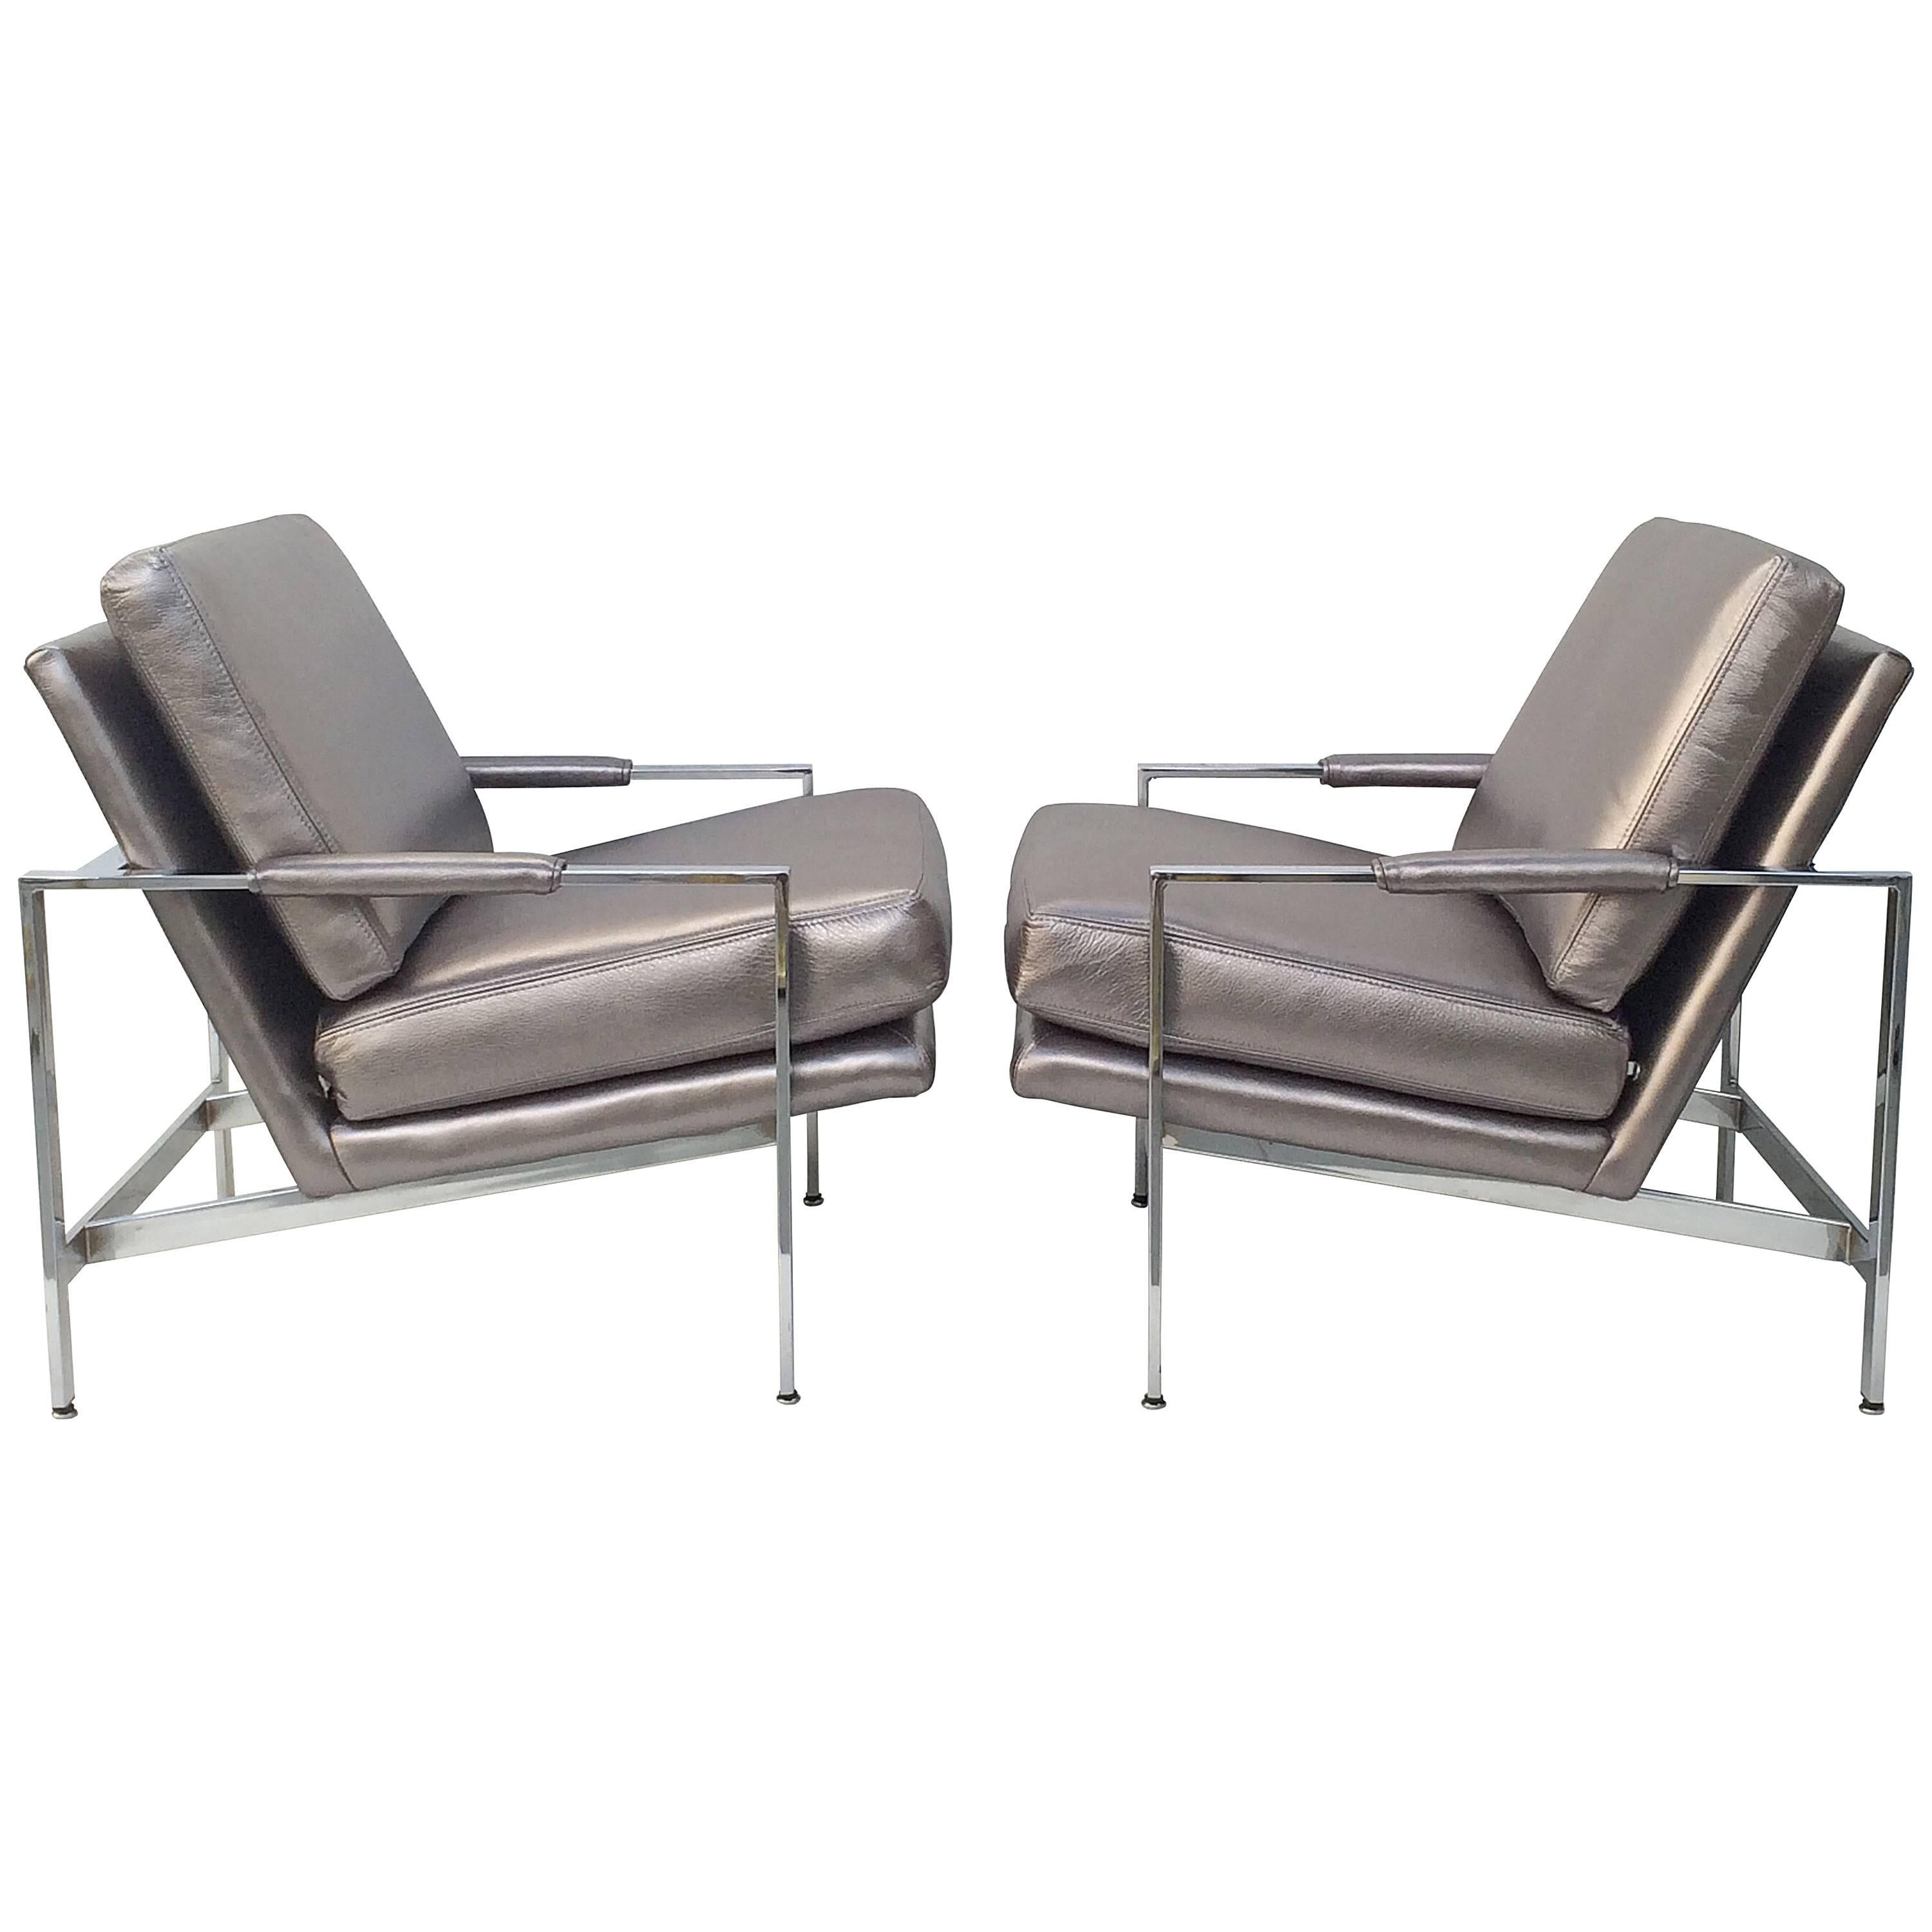 Chrome and Leather Lounge Chairs by Milo Baughman for Thayer Coggin